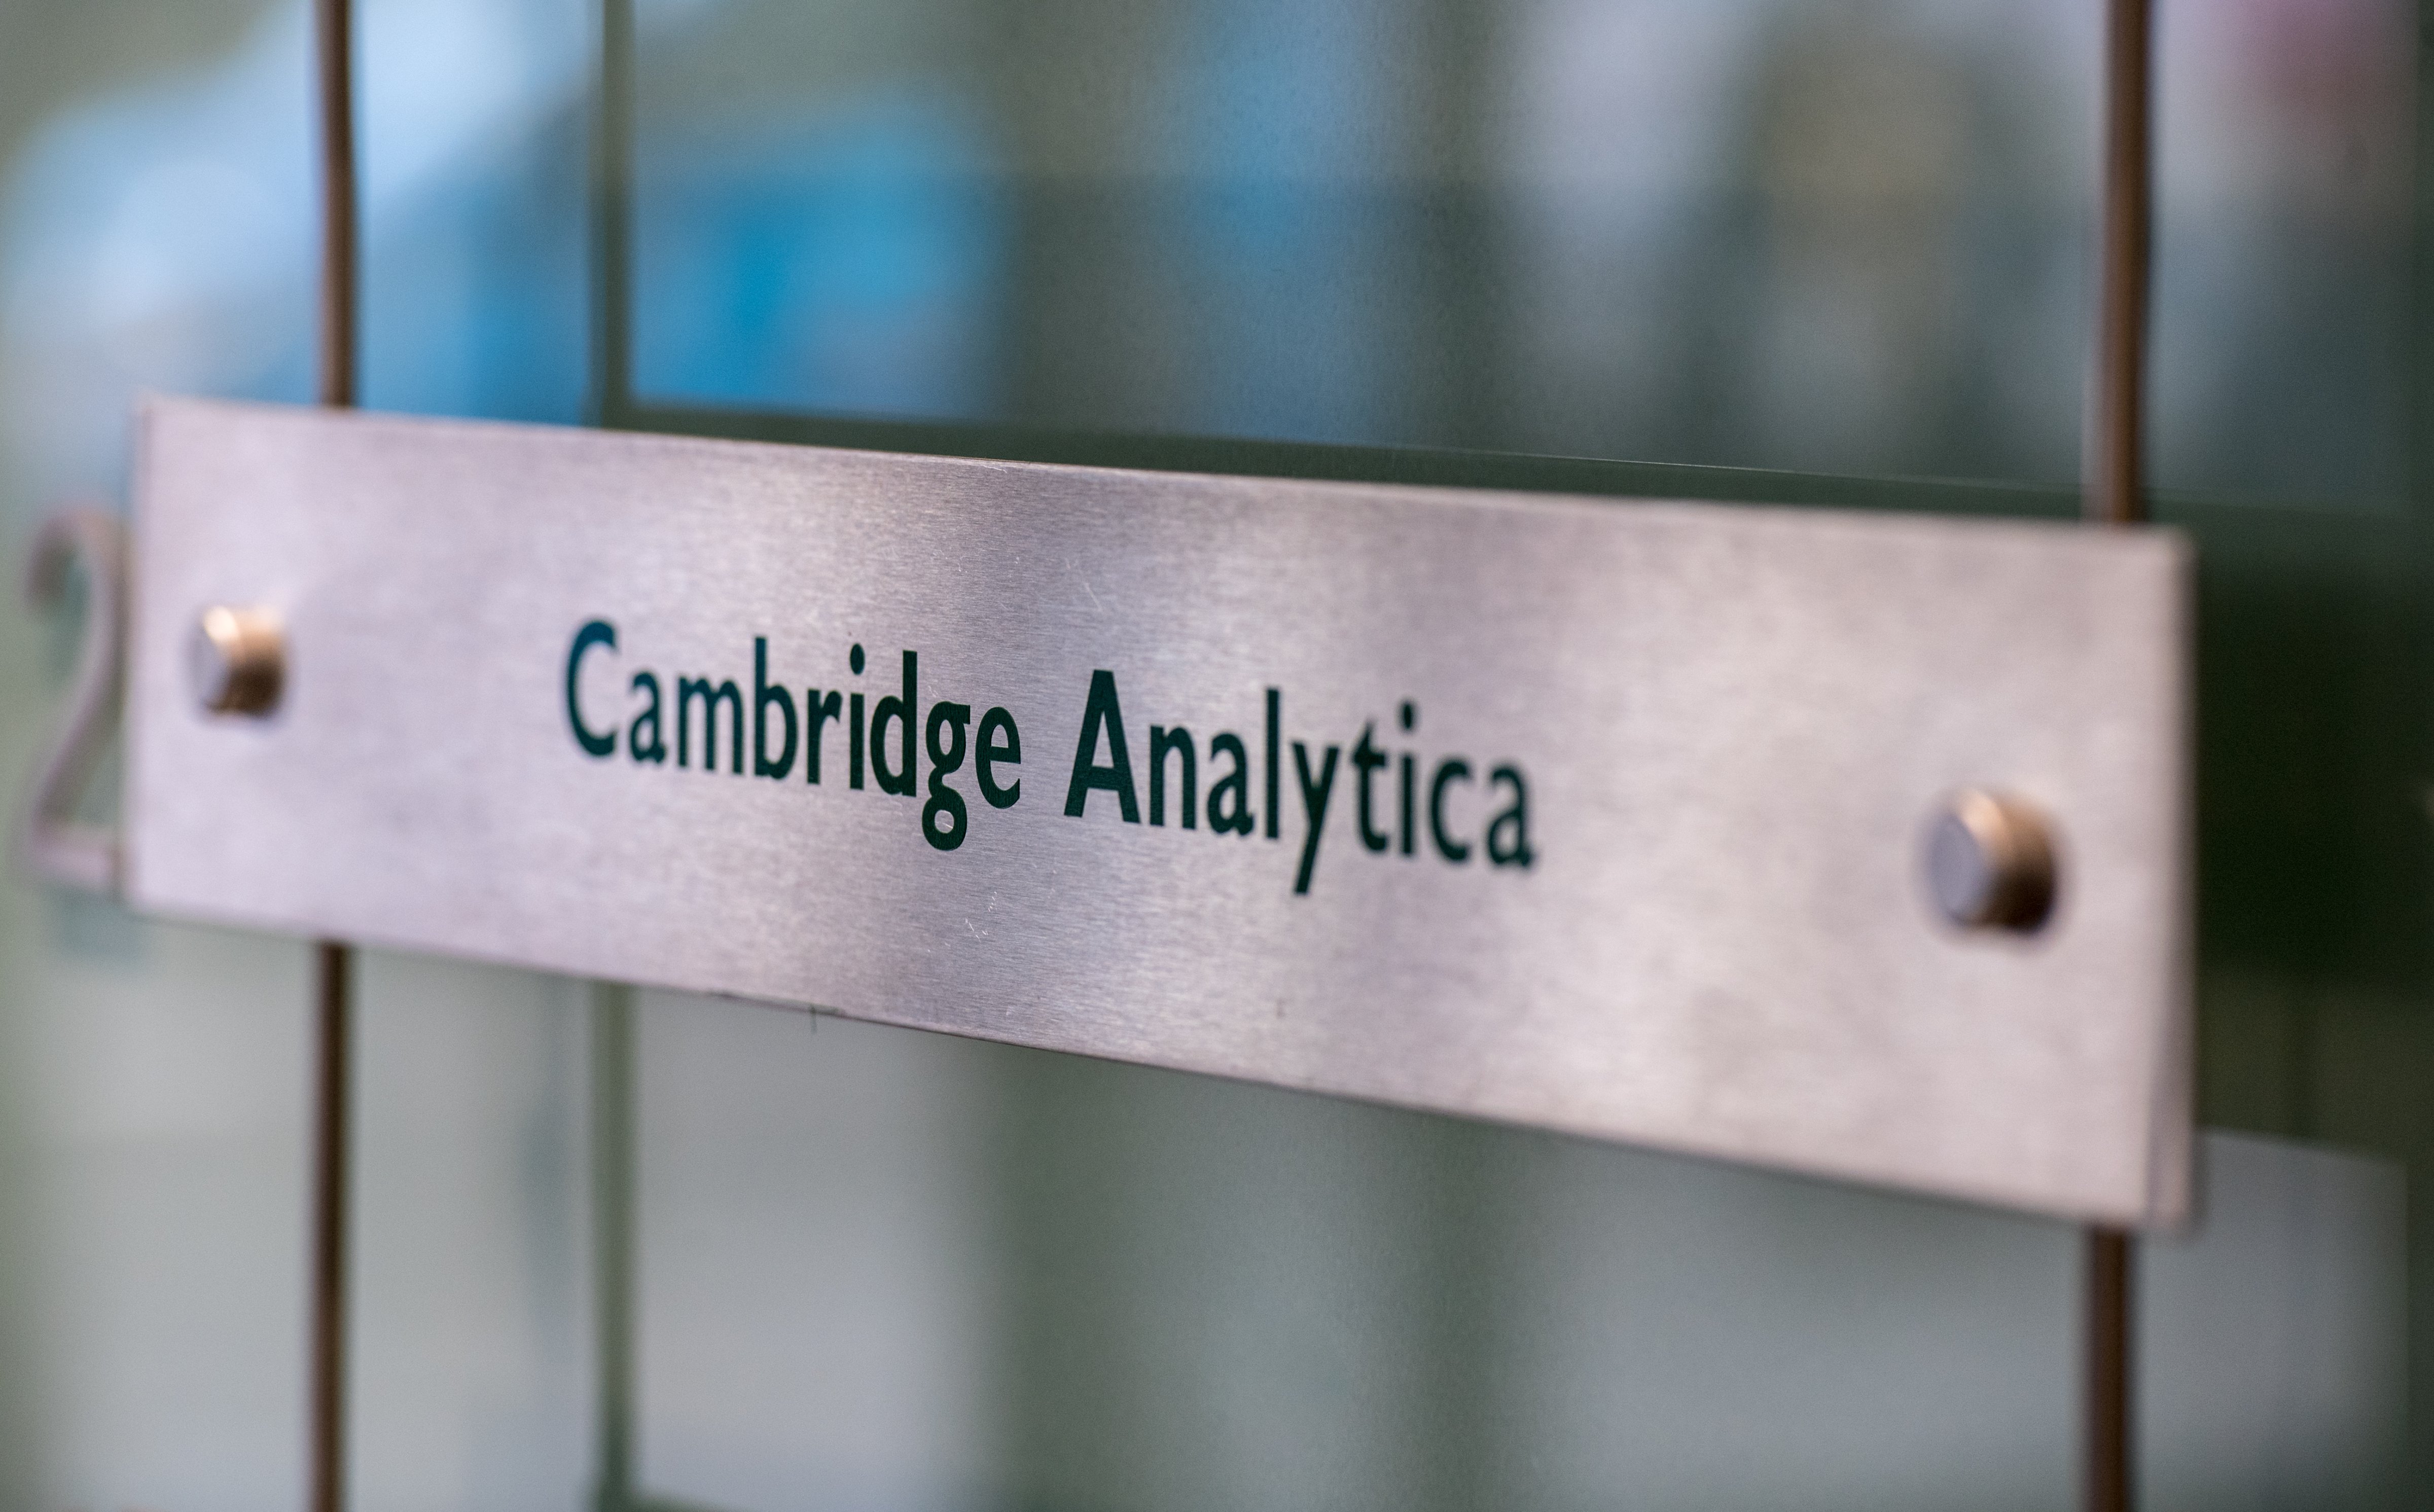 Signs for company Cambridge Analytica in the lobby of the building in which they are based on March 21, 2018 in London, England. (Chris J Ratcliffe&mdash;Getty Images)